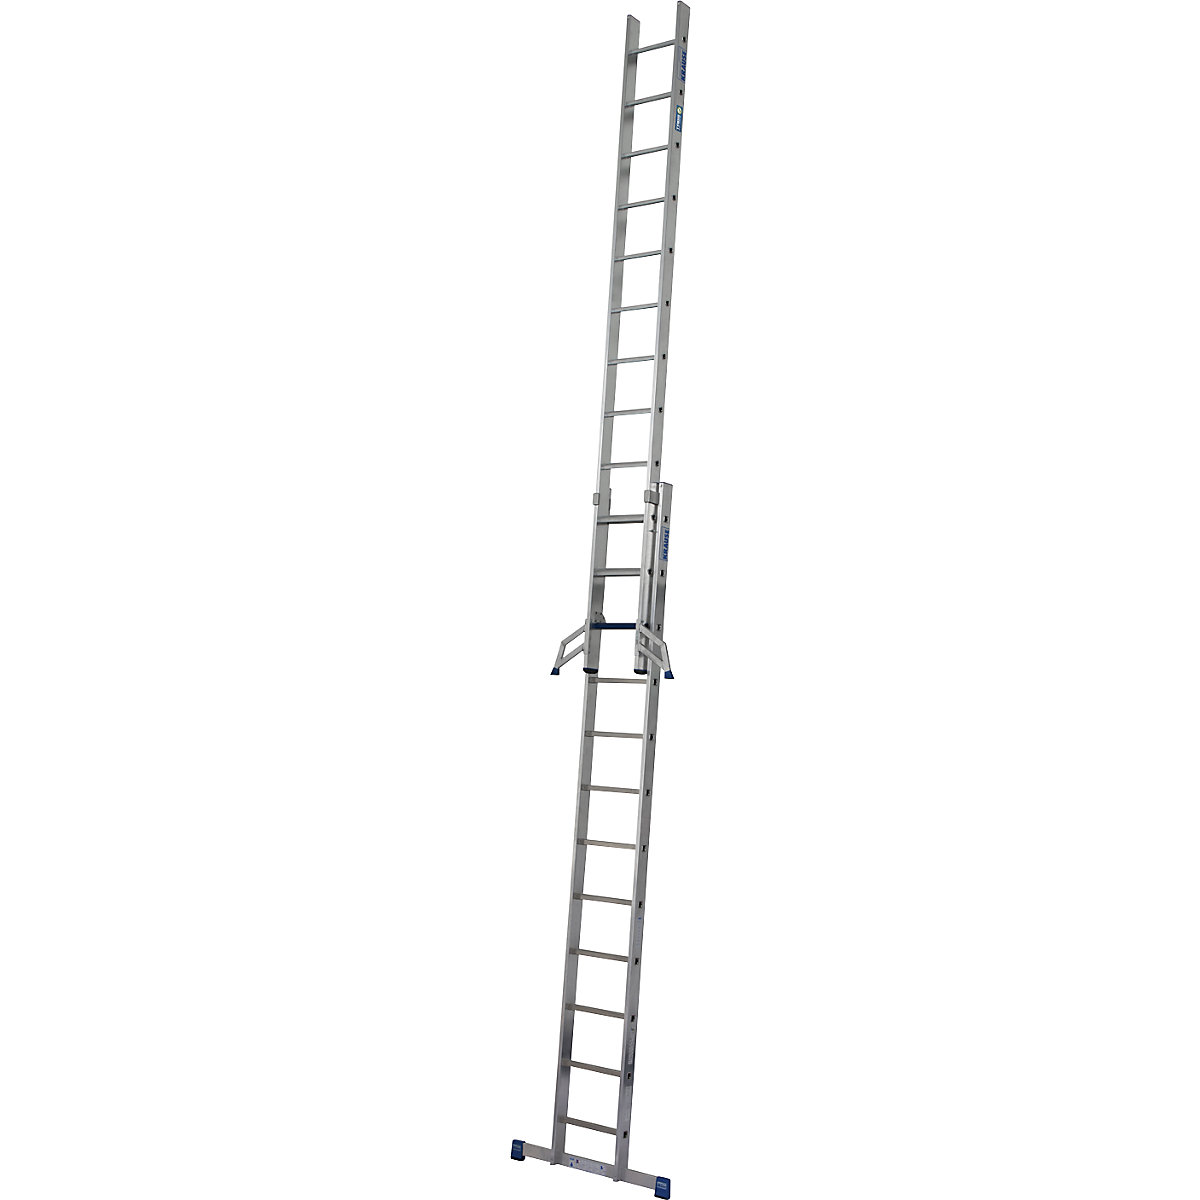 STABILO + S professional extension ladder – KRAUSE, step-rung combination, 2 x 12 steps/rungs-15